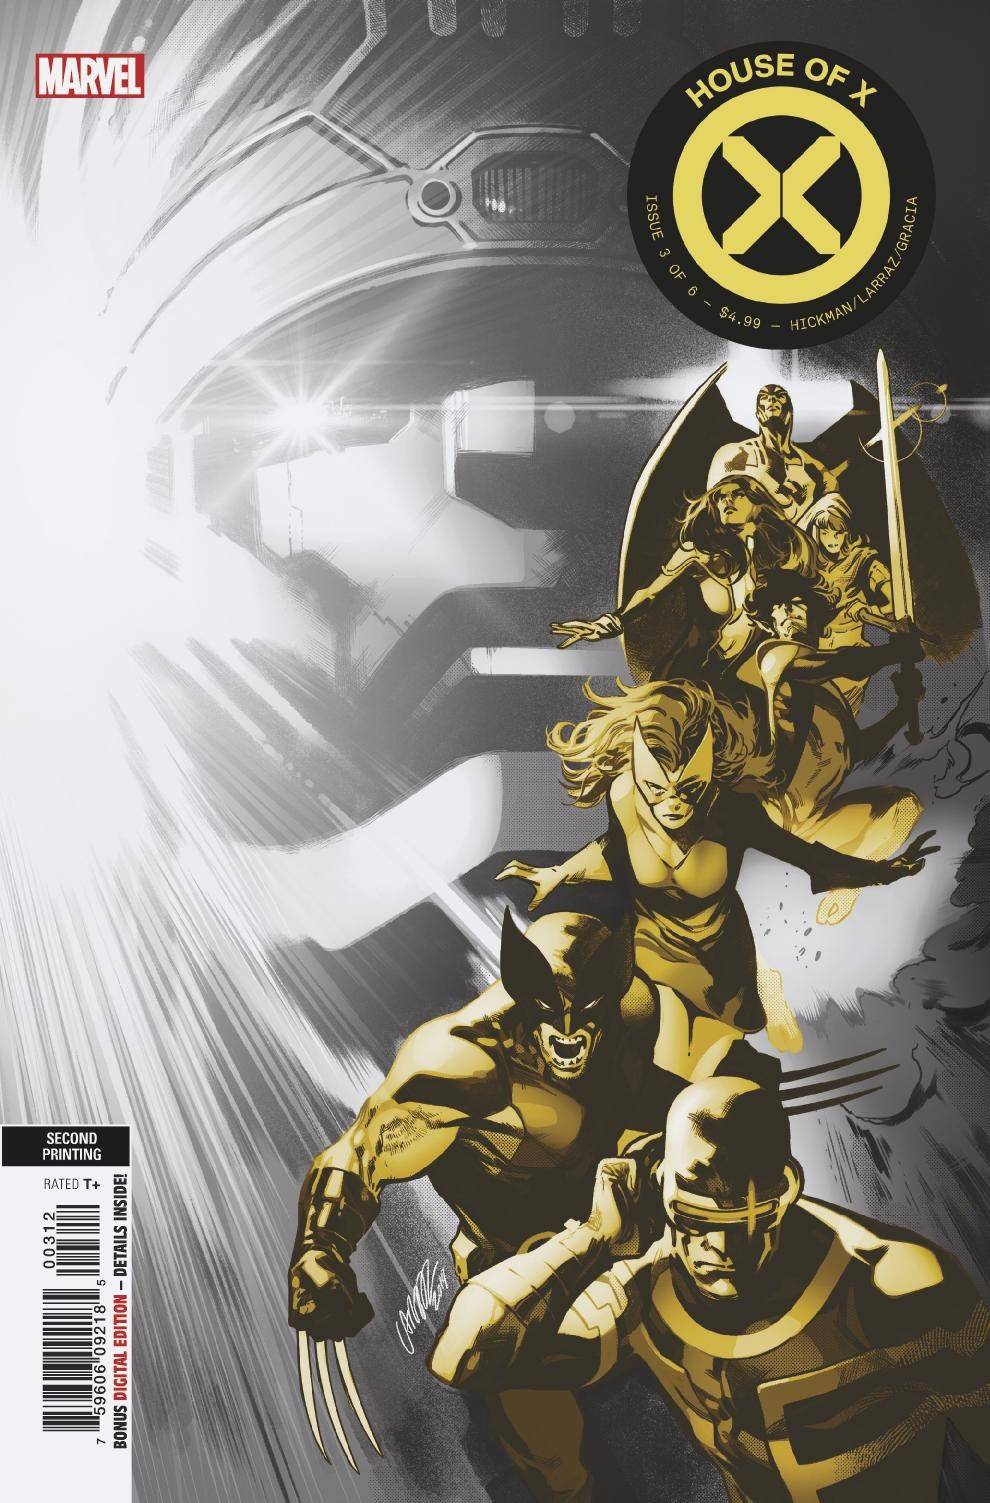 HOUSE OF X #3 (OF 6) 2nd Print Pepe Larraz Variant (09/25/2019) MARVEL